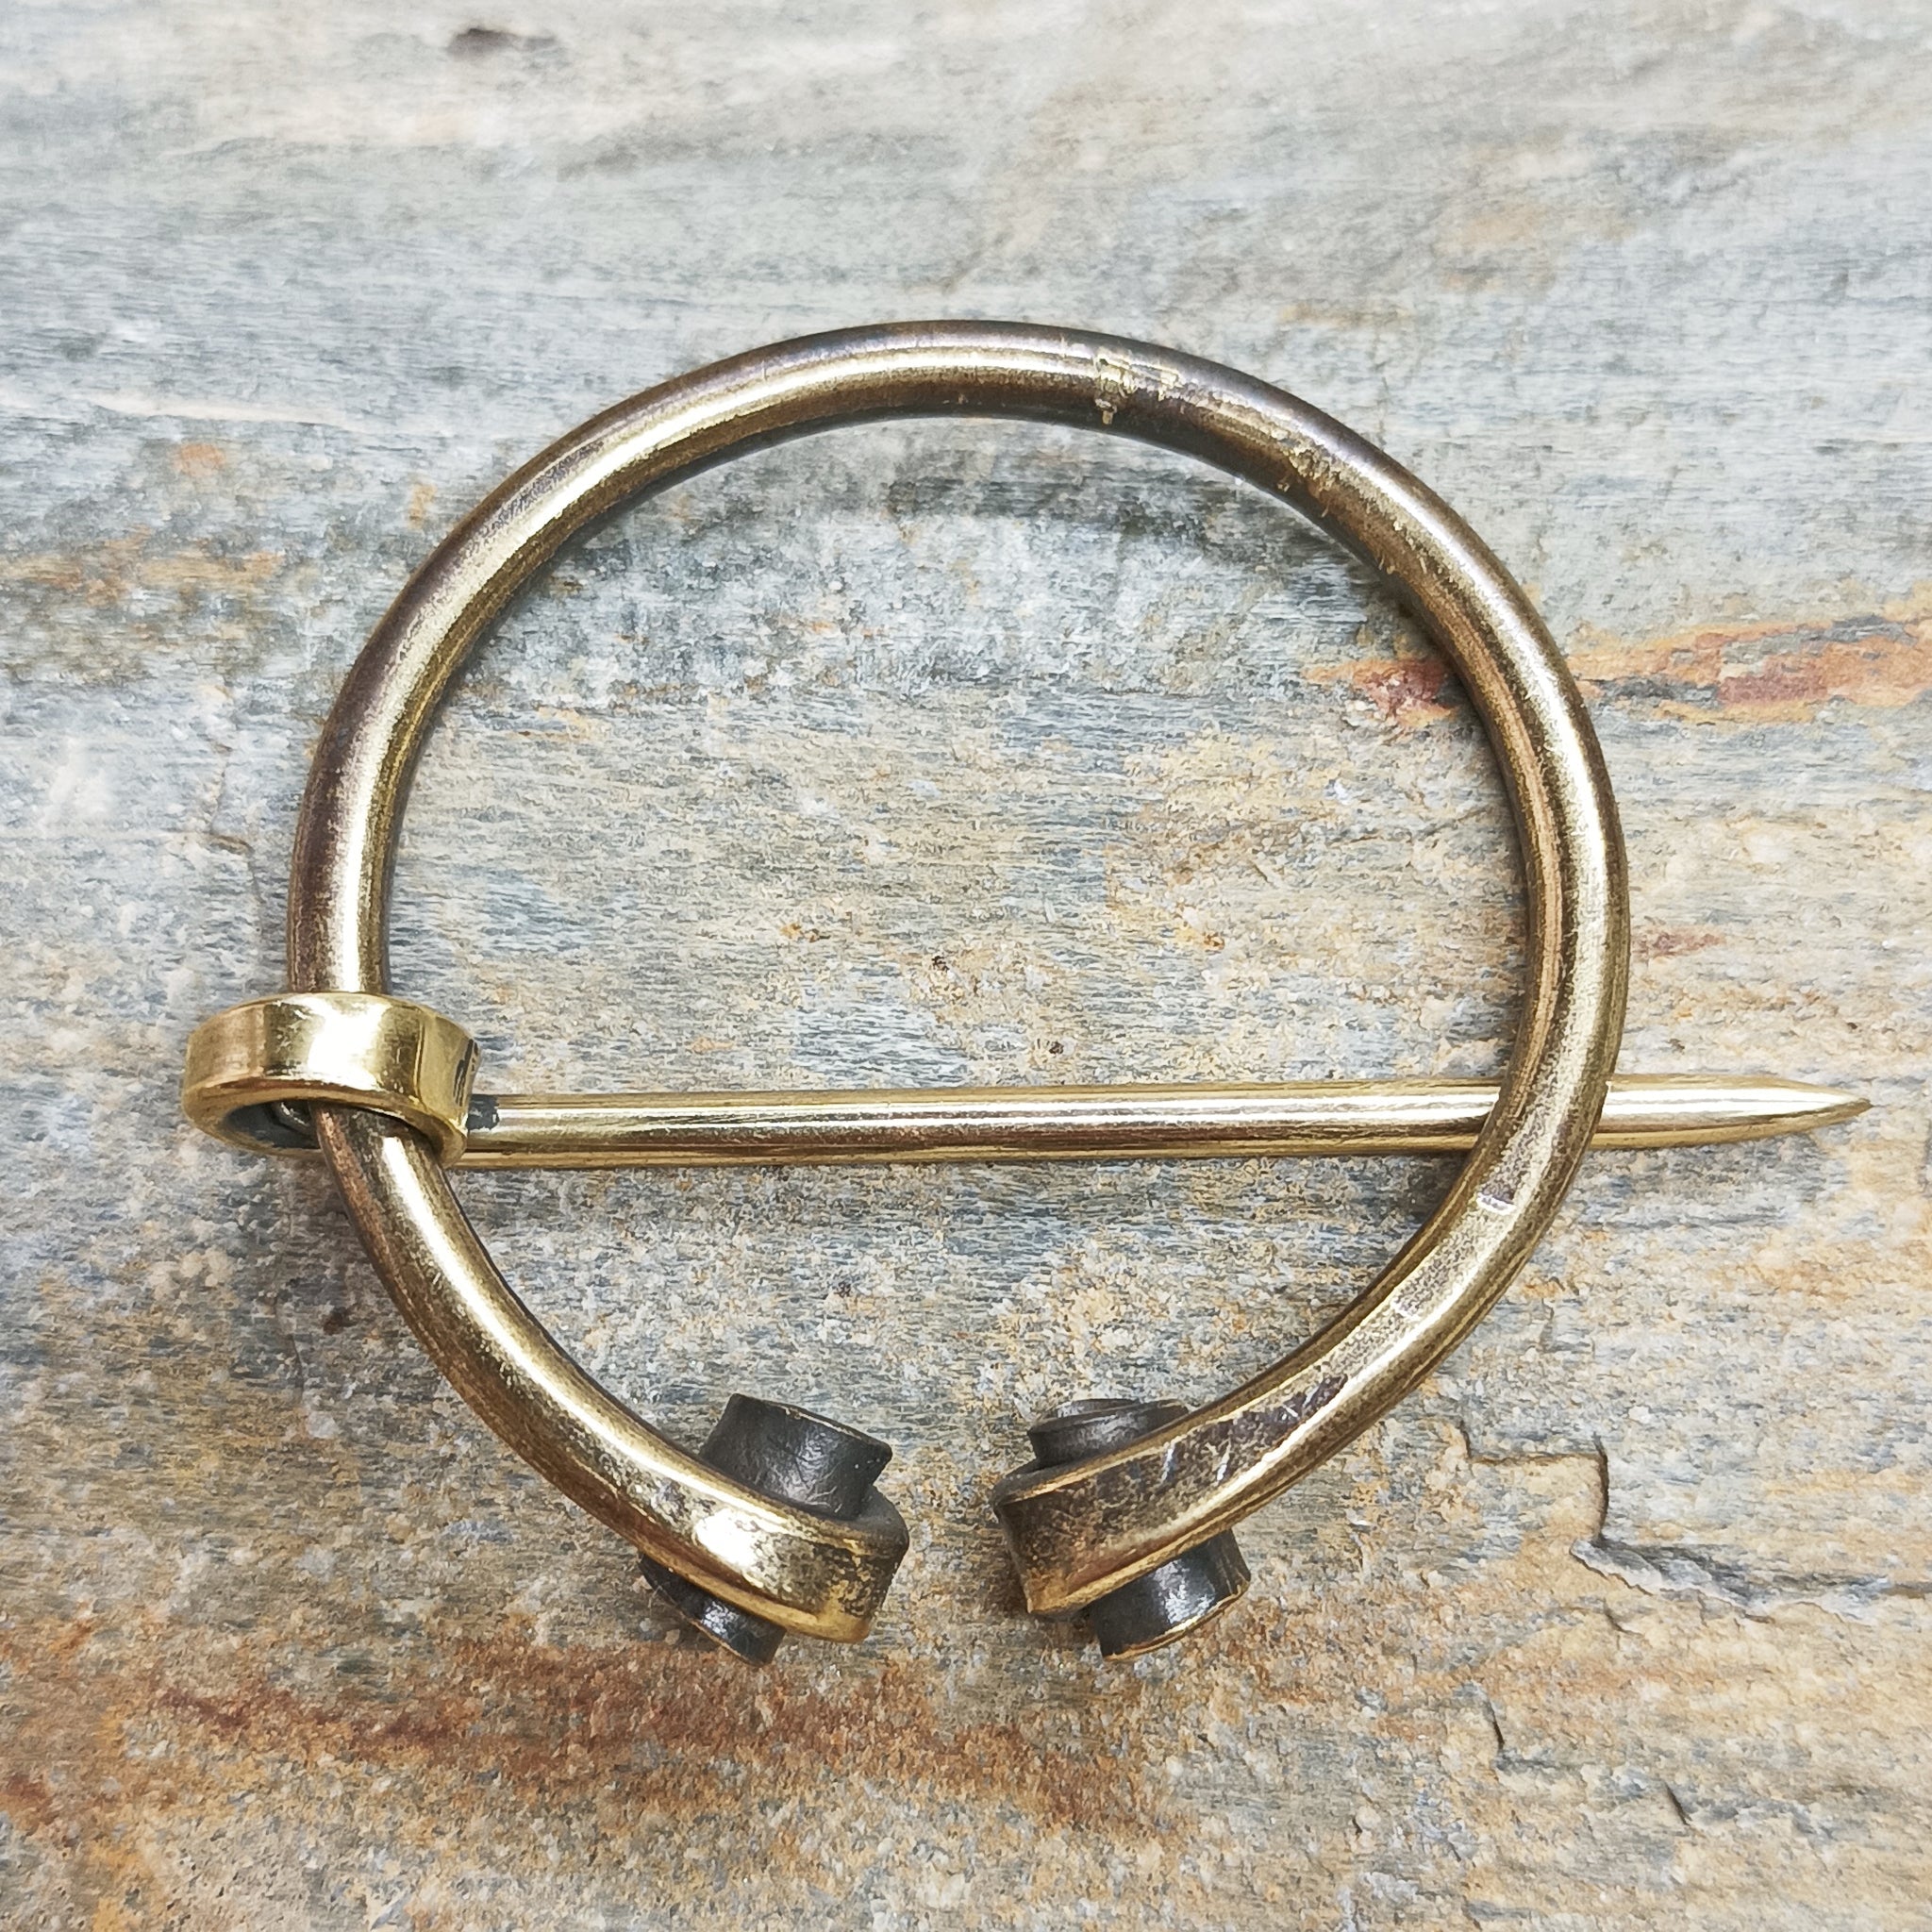 50mm Brass Cloak Pin / Clothes Pin on Rock - Back View